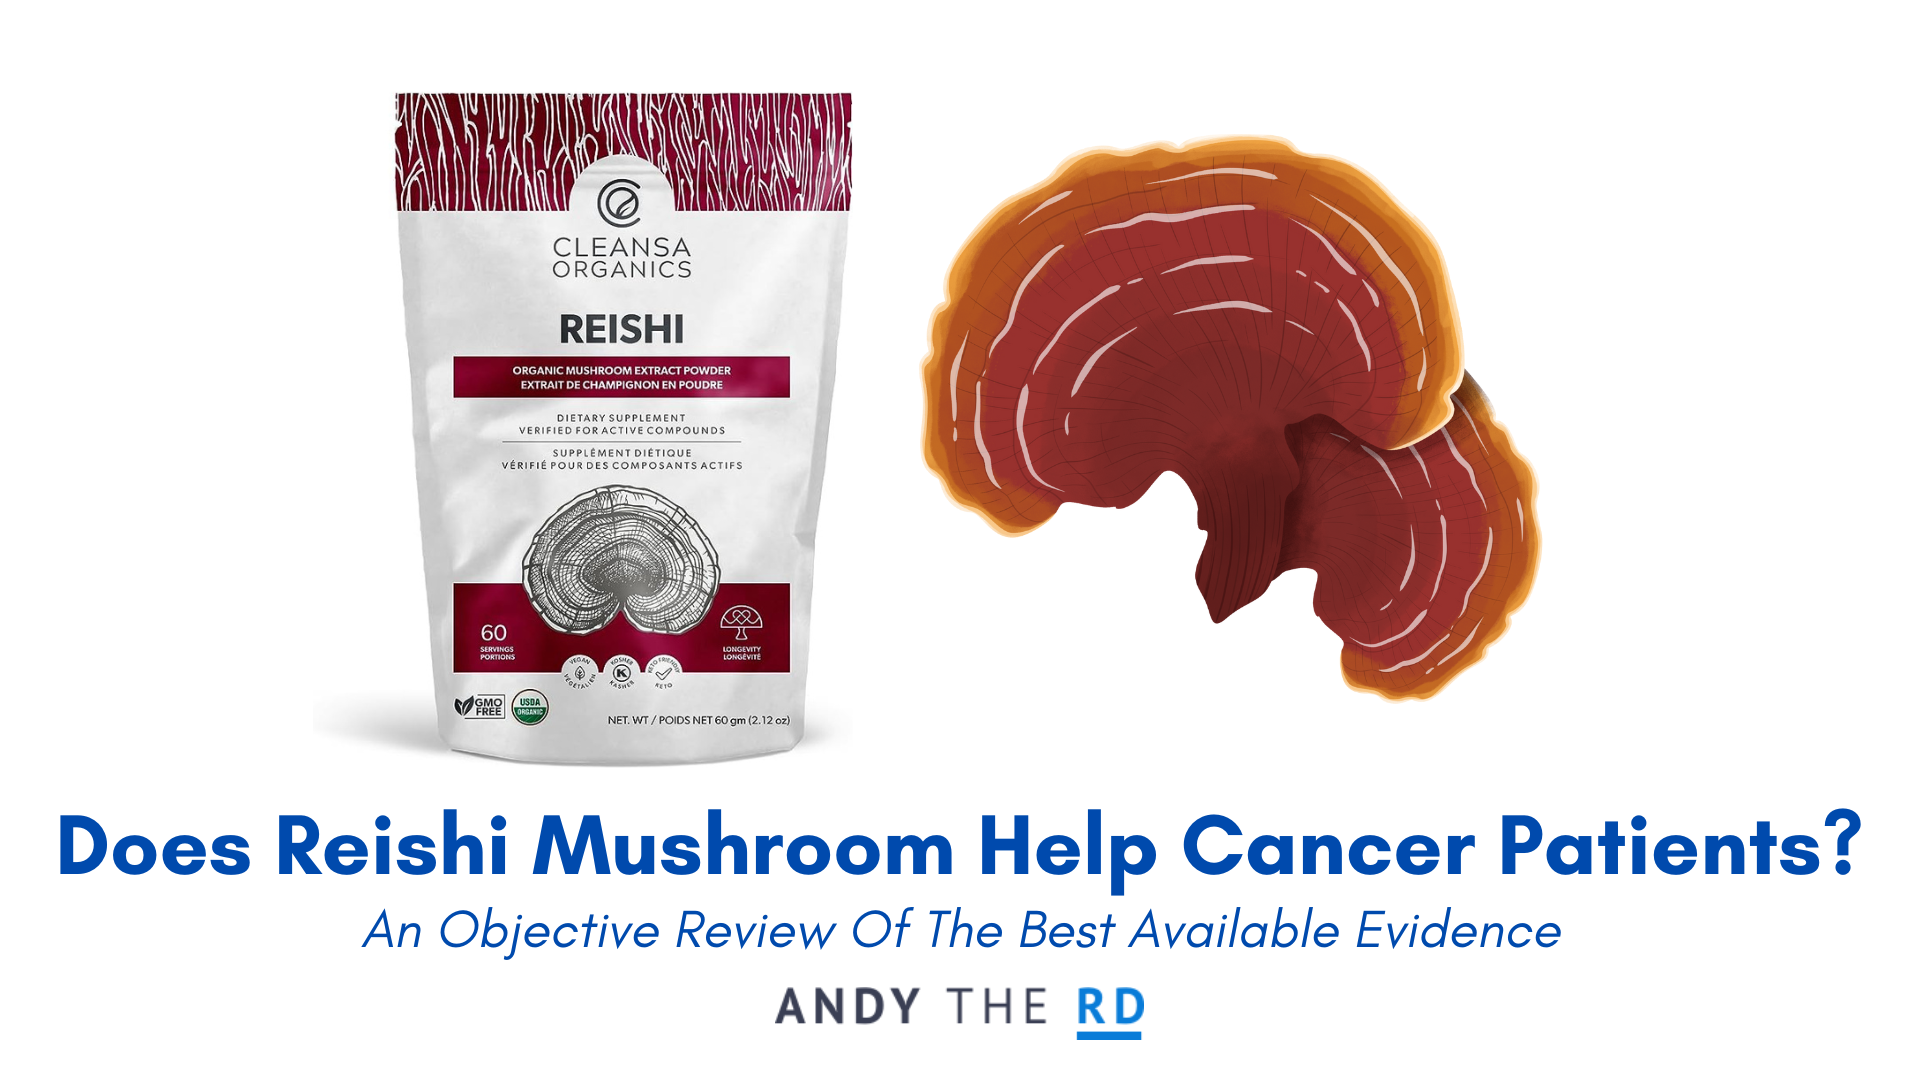 Reishi Mushroom & Cancer Patients – The Evidence